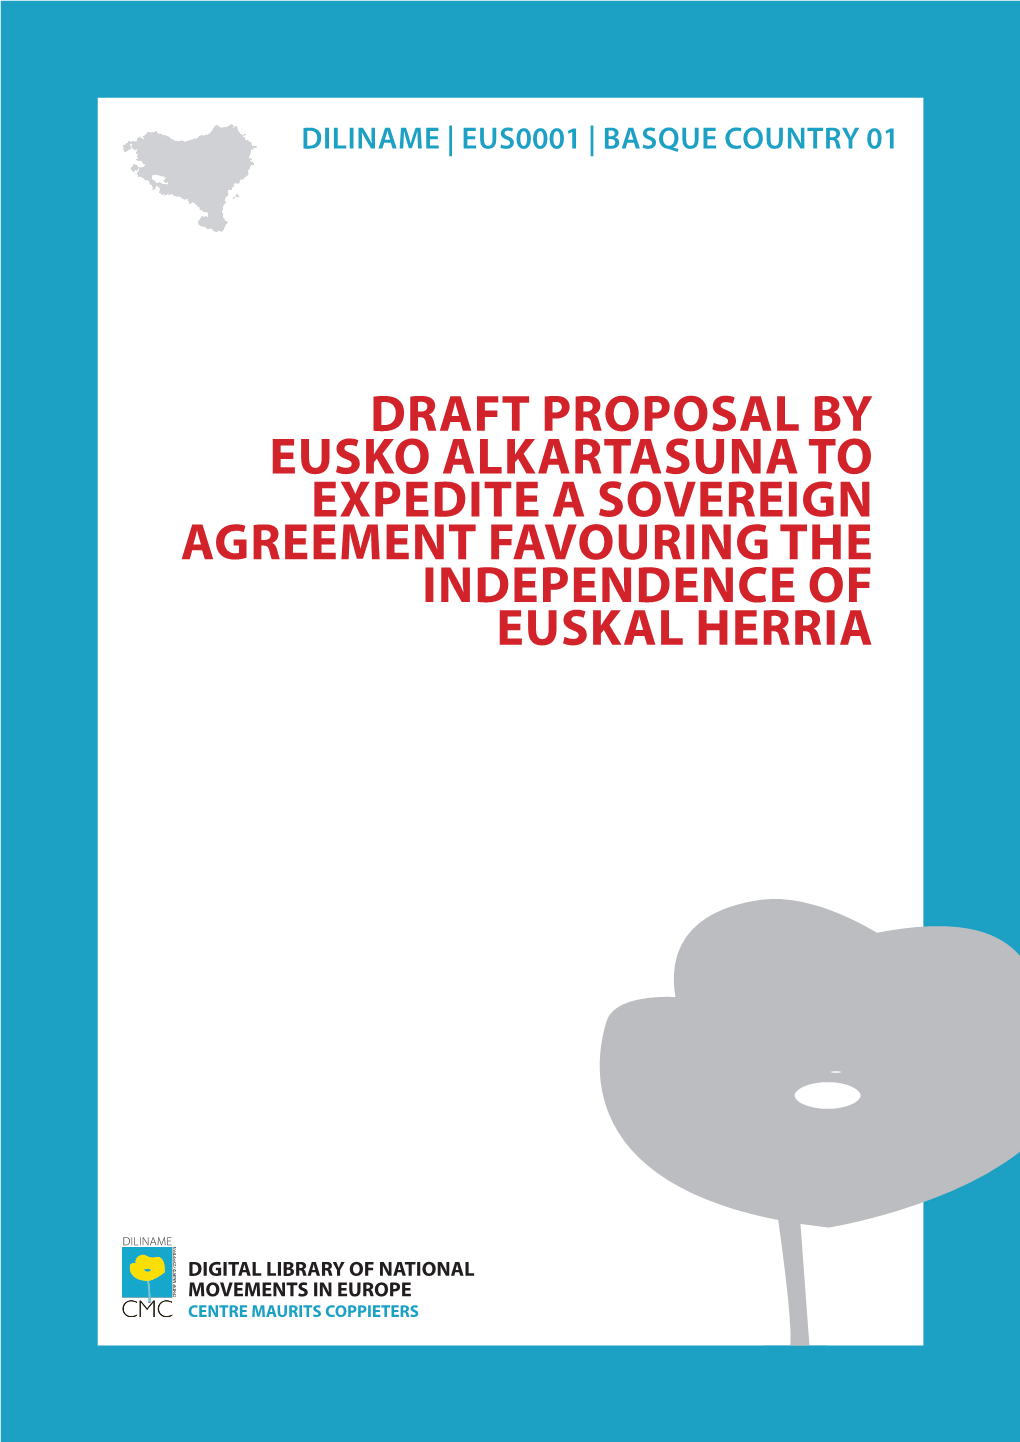 Draft Proposal by Eusko Alkartasuna to Expedite a Sovereign Agreement Favouring the Independence of Euskal Herria